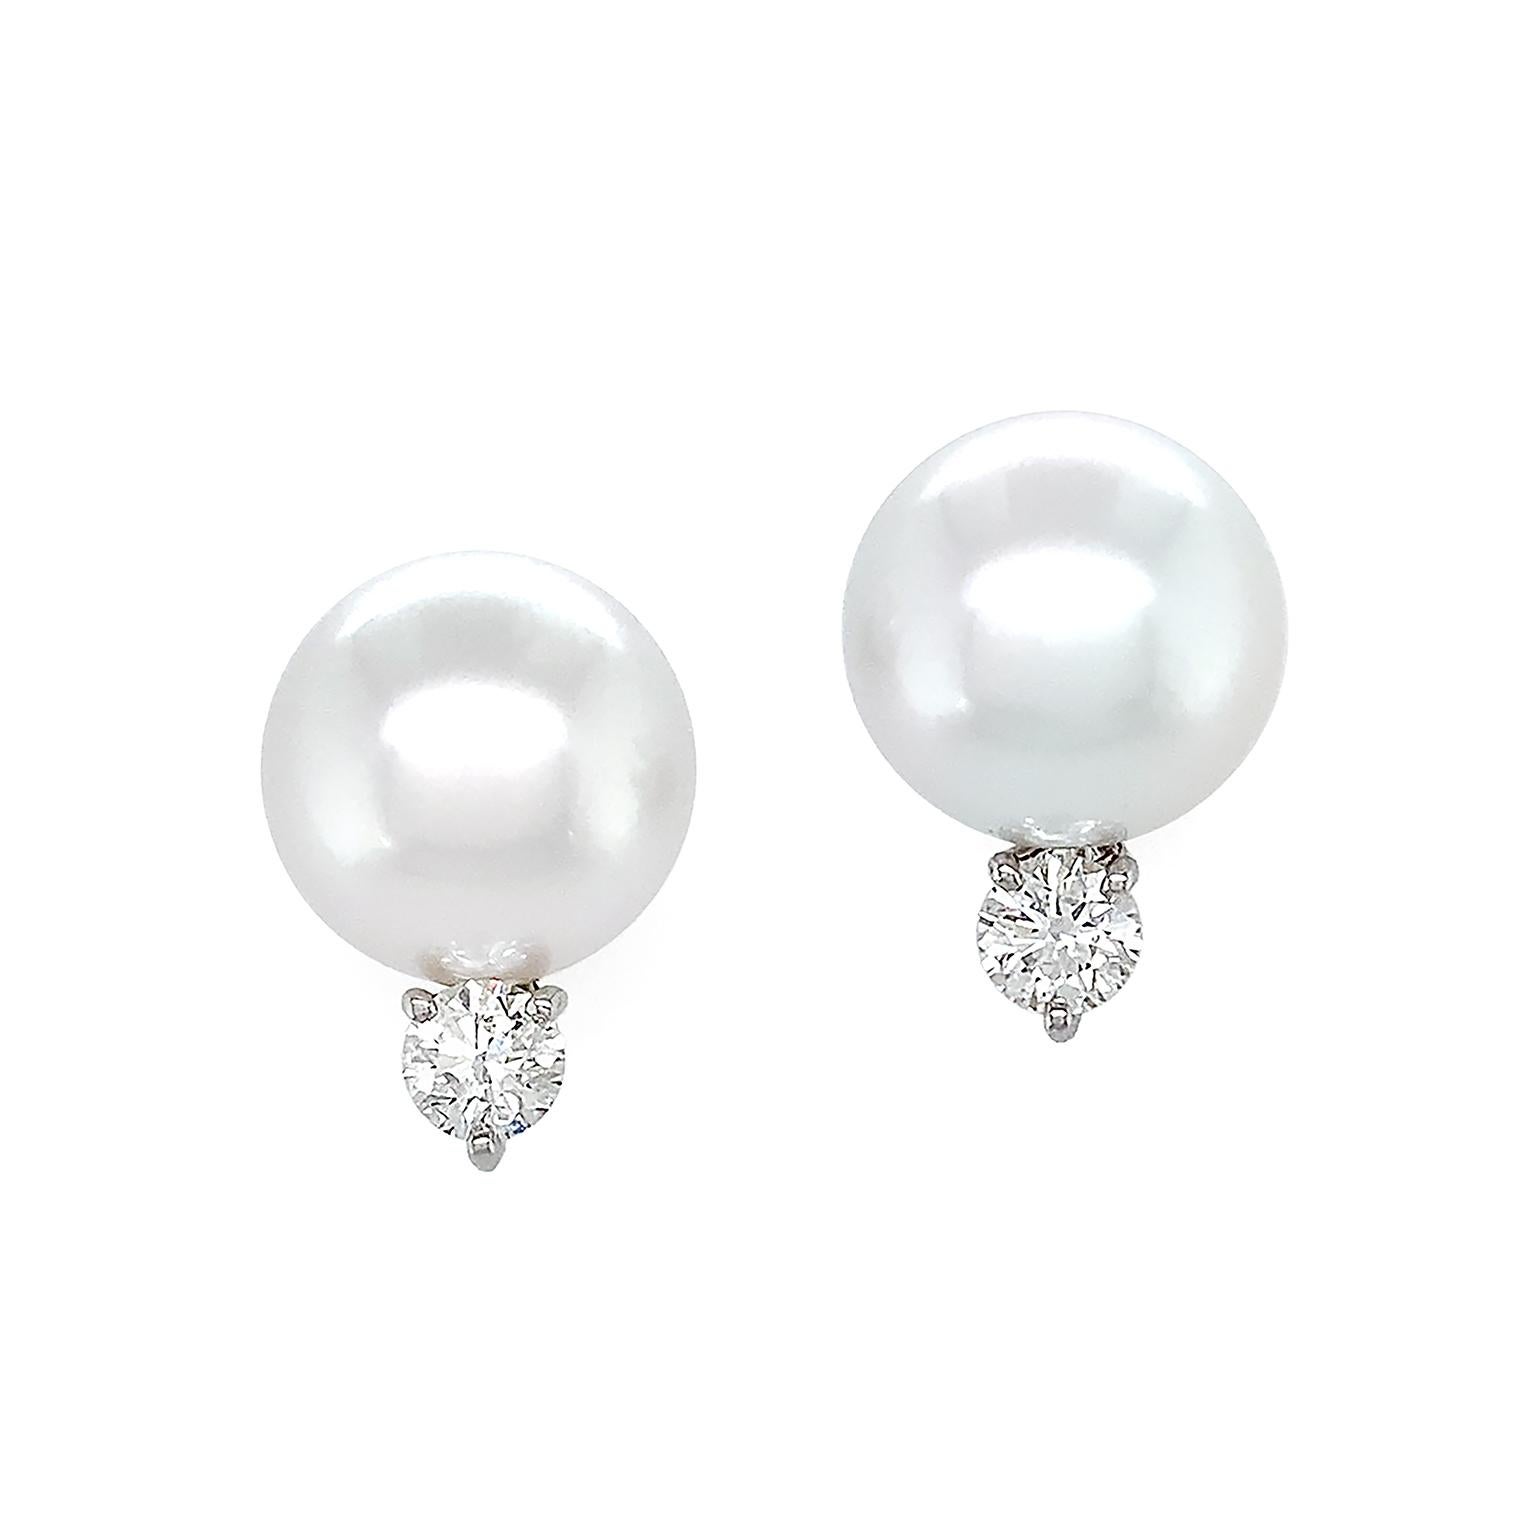 South Sea pearls, treasured for the sheen across their nacre bodies, are the basis of these earrings. Above is a single radiant round south sea pearl. Beneath the pearl features a brilliant cut diamond secured by platinum prongs for an opulent